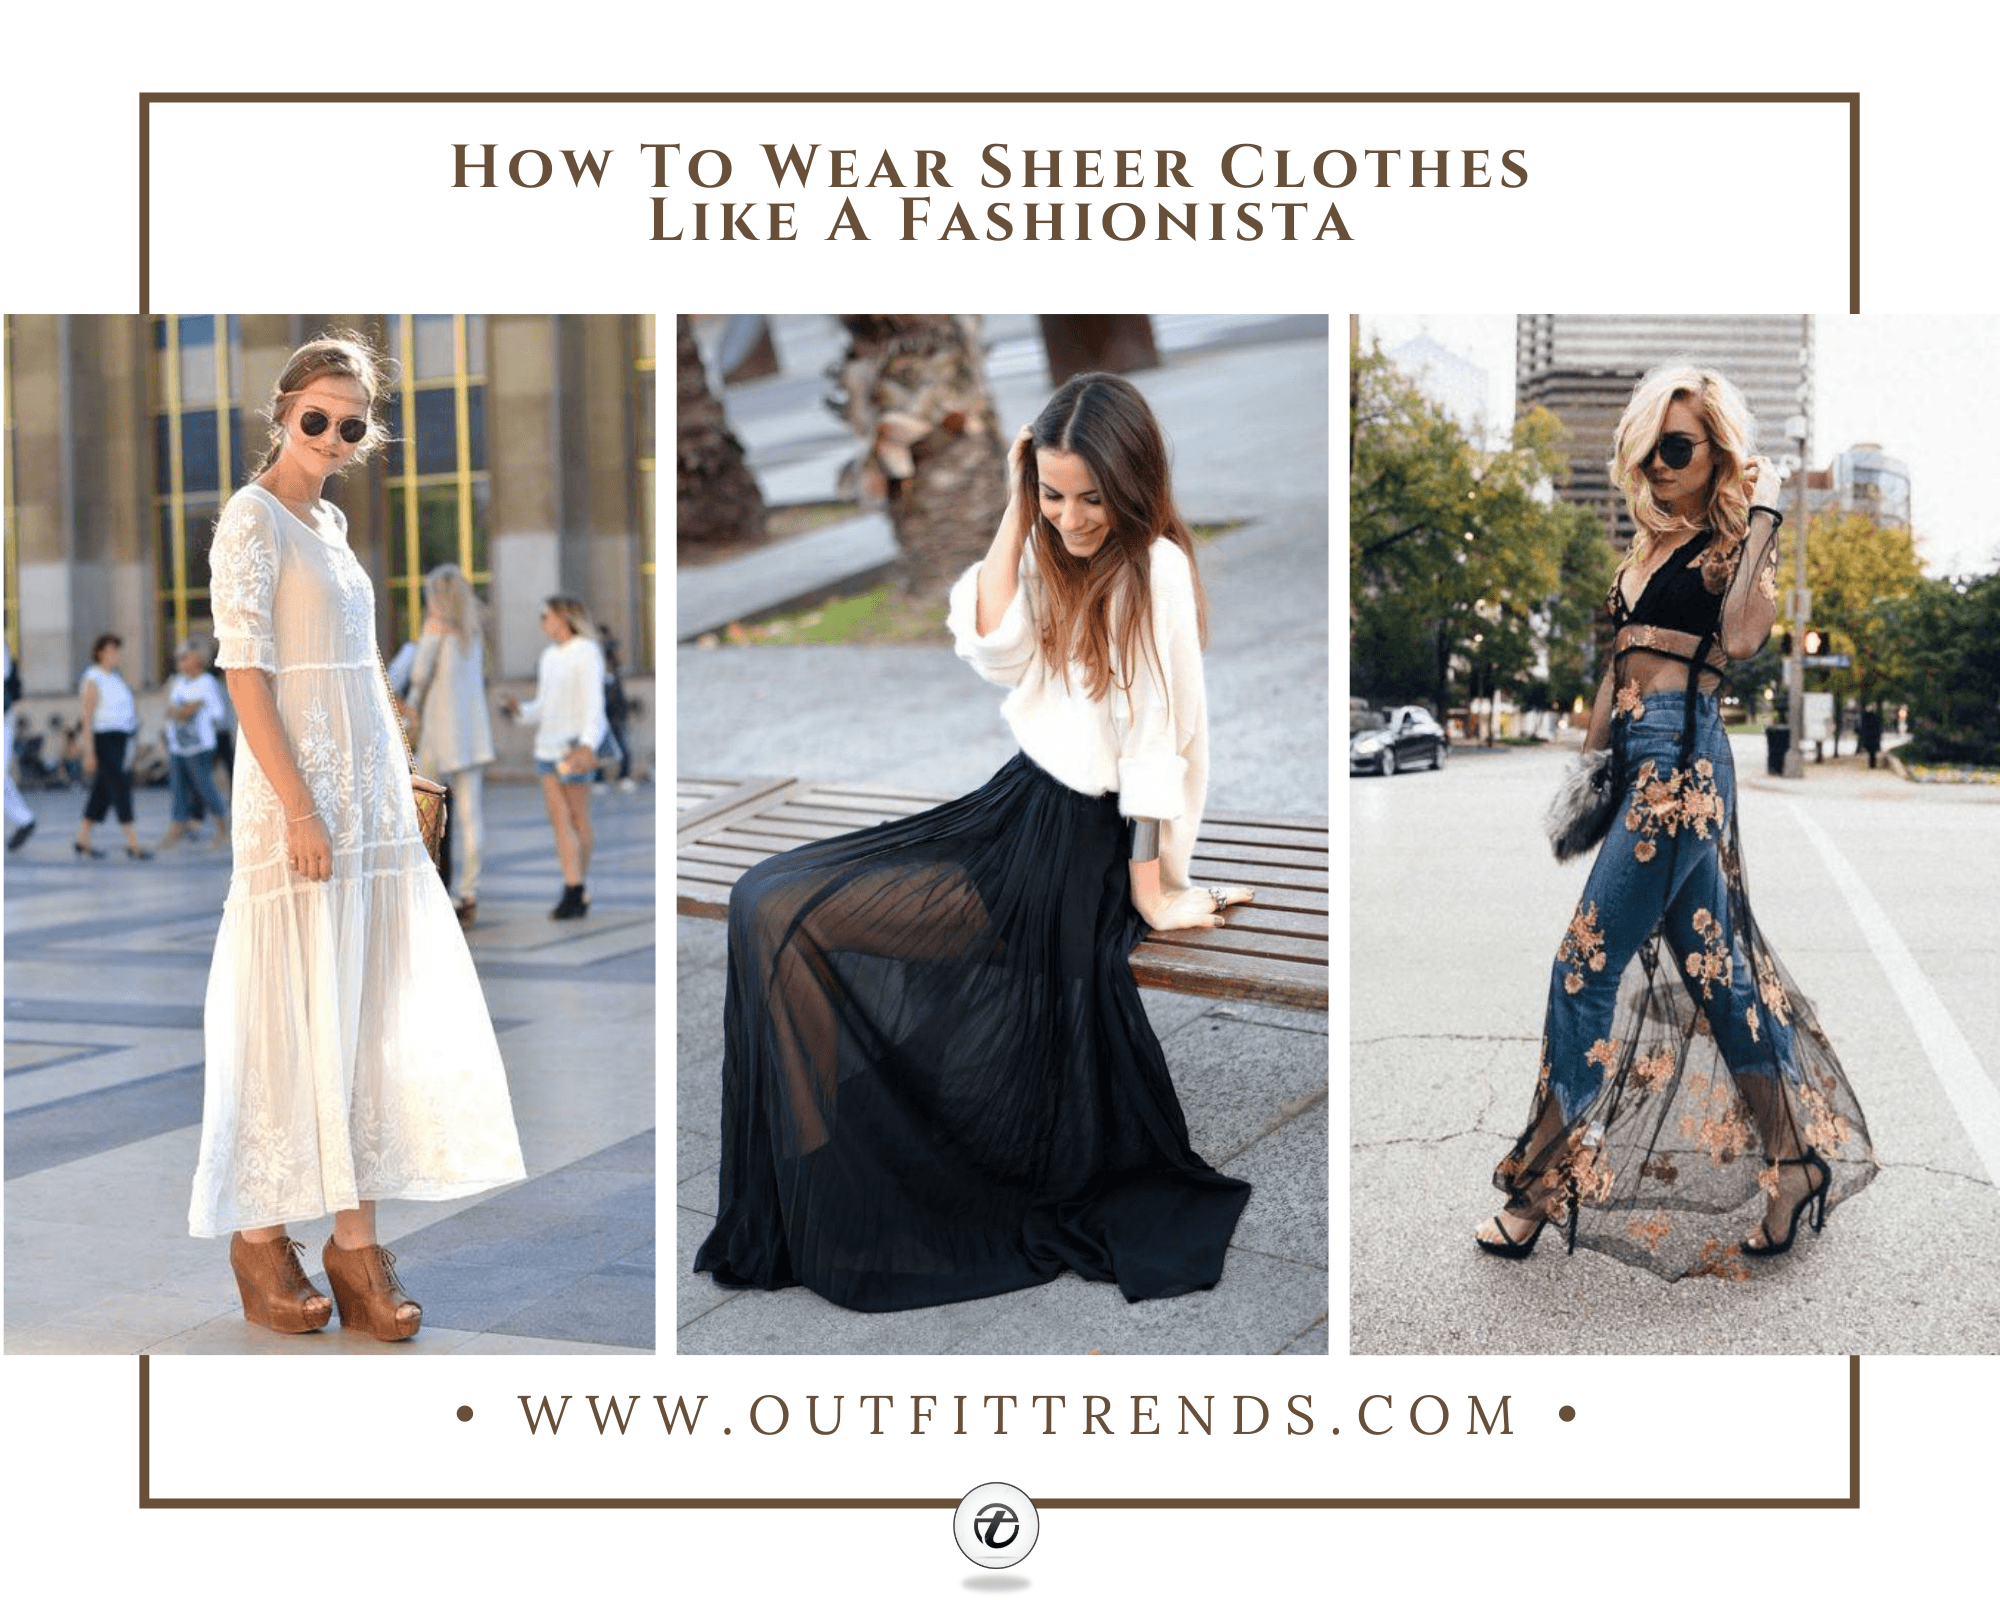 33 Ideas on How to Wear Sheer & See-Through Outfits